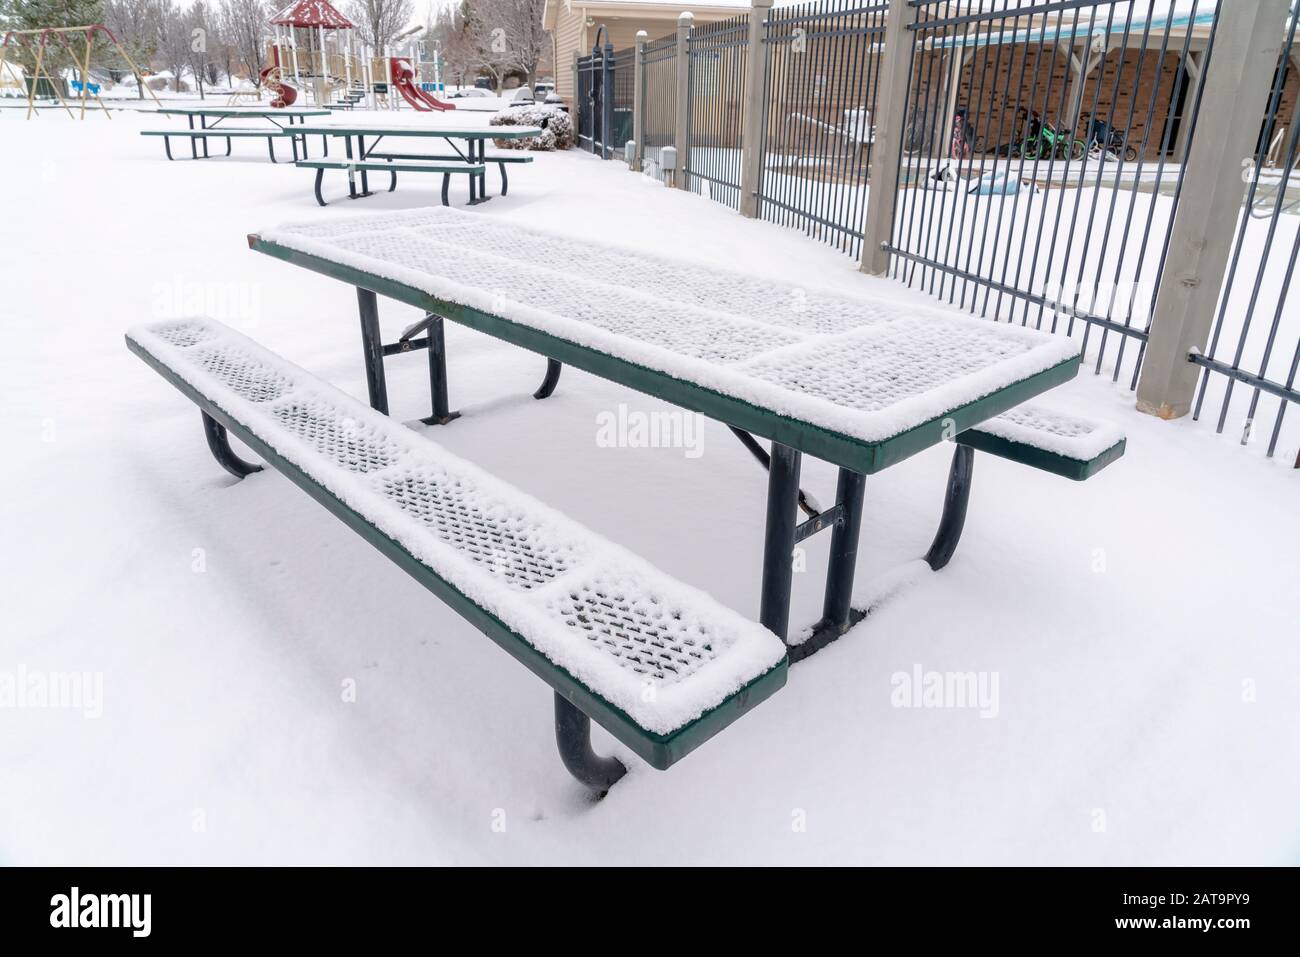 Park picnic table and benches against snow covered ground on a cold winter day Stock Photo